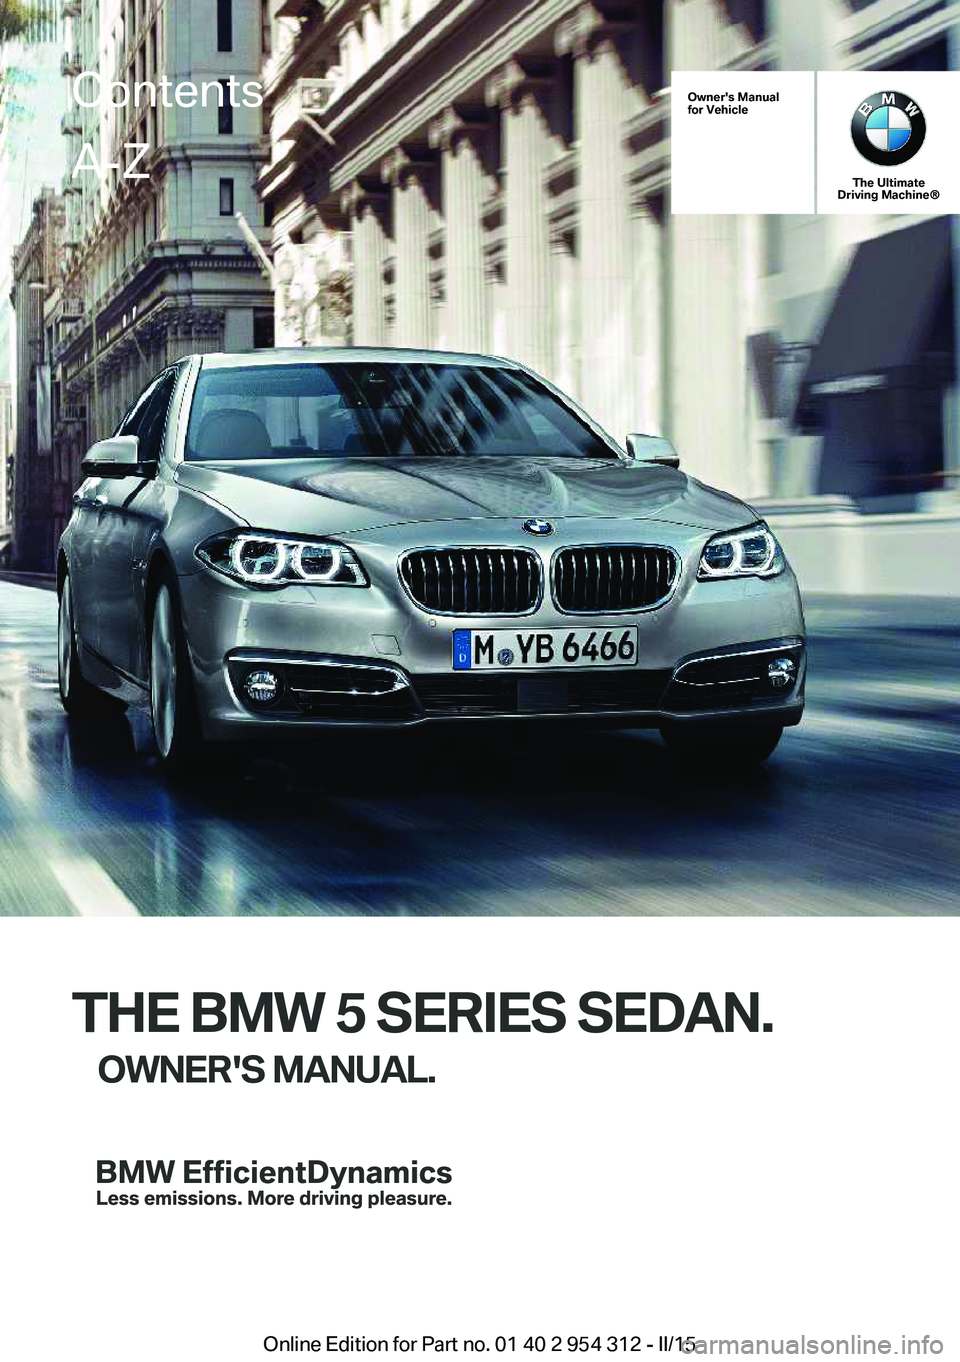 BMW 535I SEDAN 2015  Owners Manual Owner's Manual
for Vehicle
The Ultimate
Driving Machine®
THE BMW 5 SERIES SEDAN.
OWNER'S MANUAL.
ContentsA-Z
Online Edition for Part no. 01 40 2 954 312 - II/15   